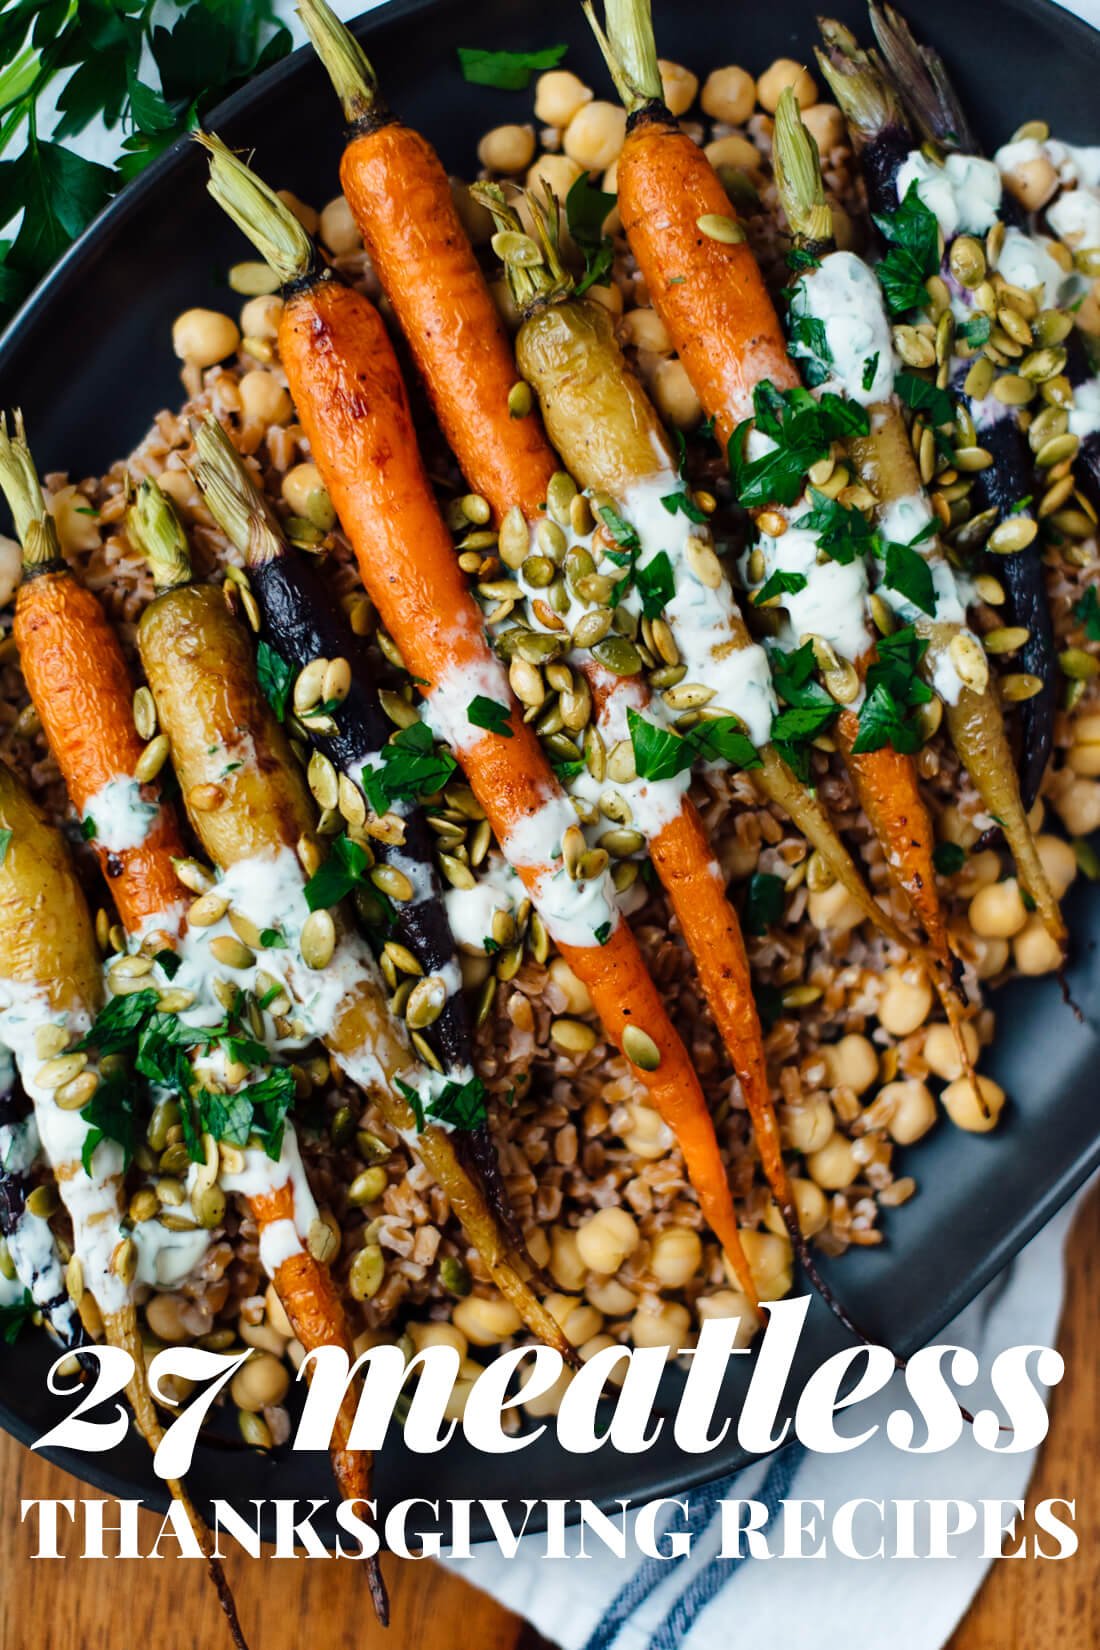 27 Meatless Thanksgiving Recipes